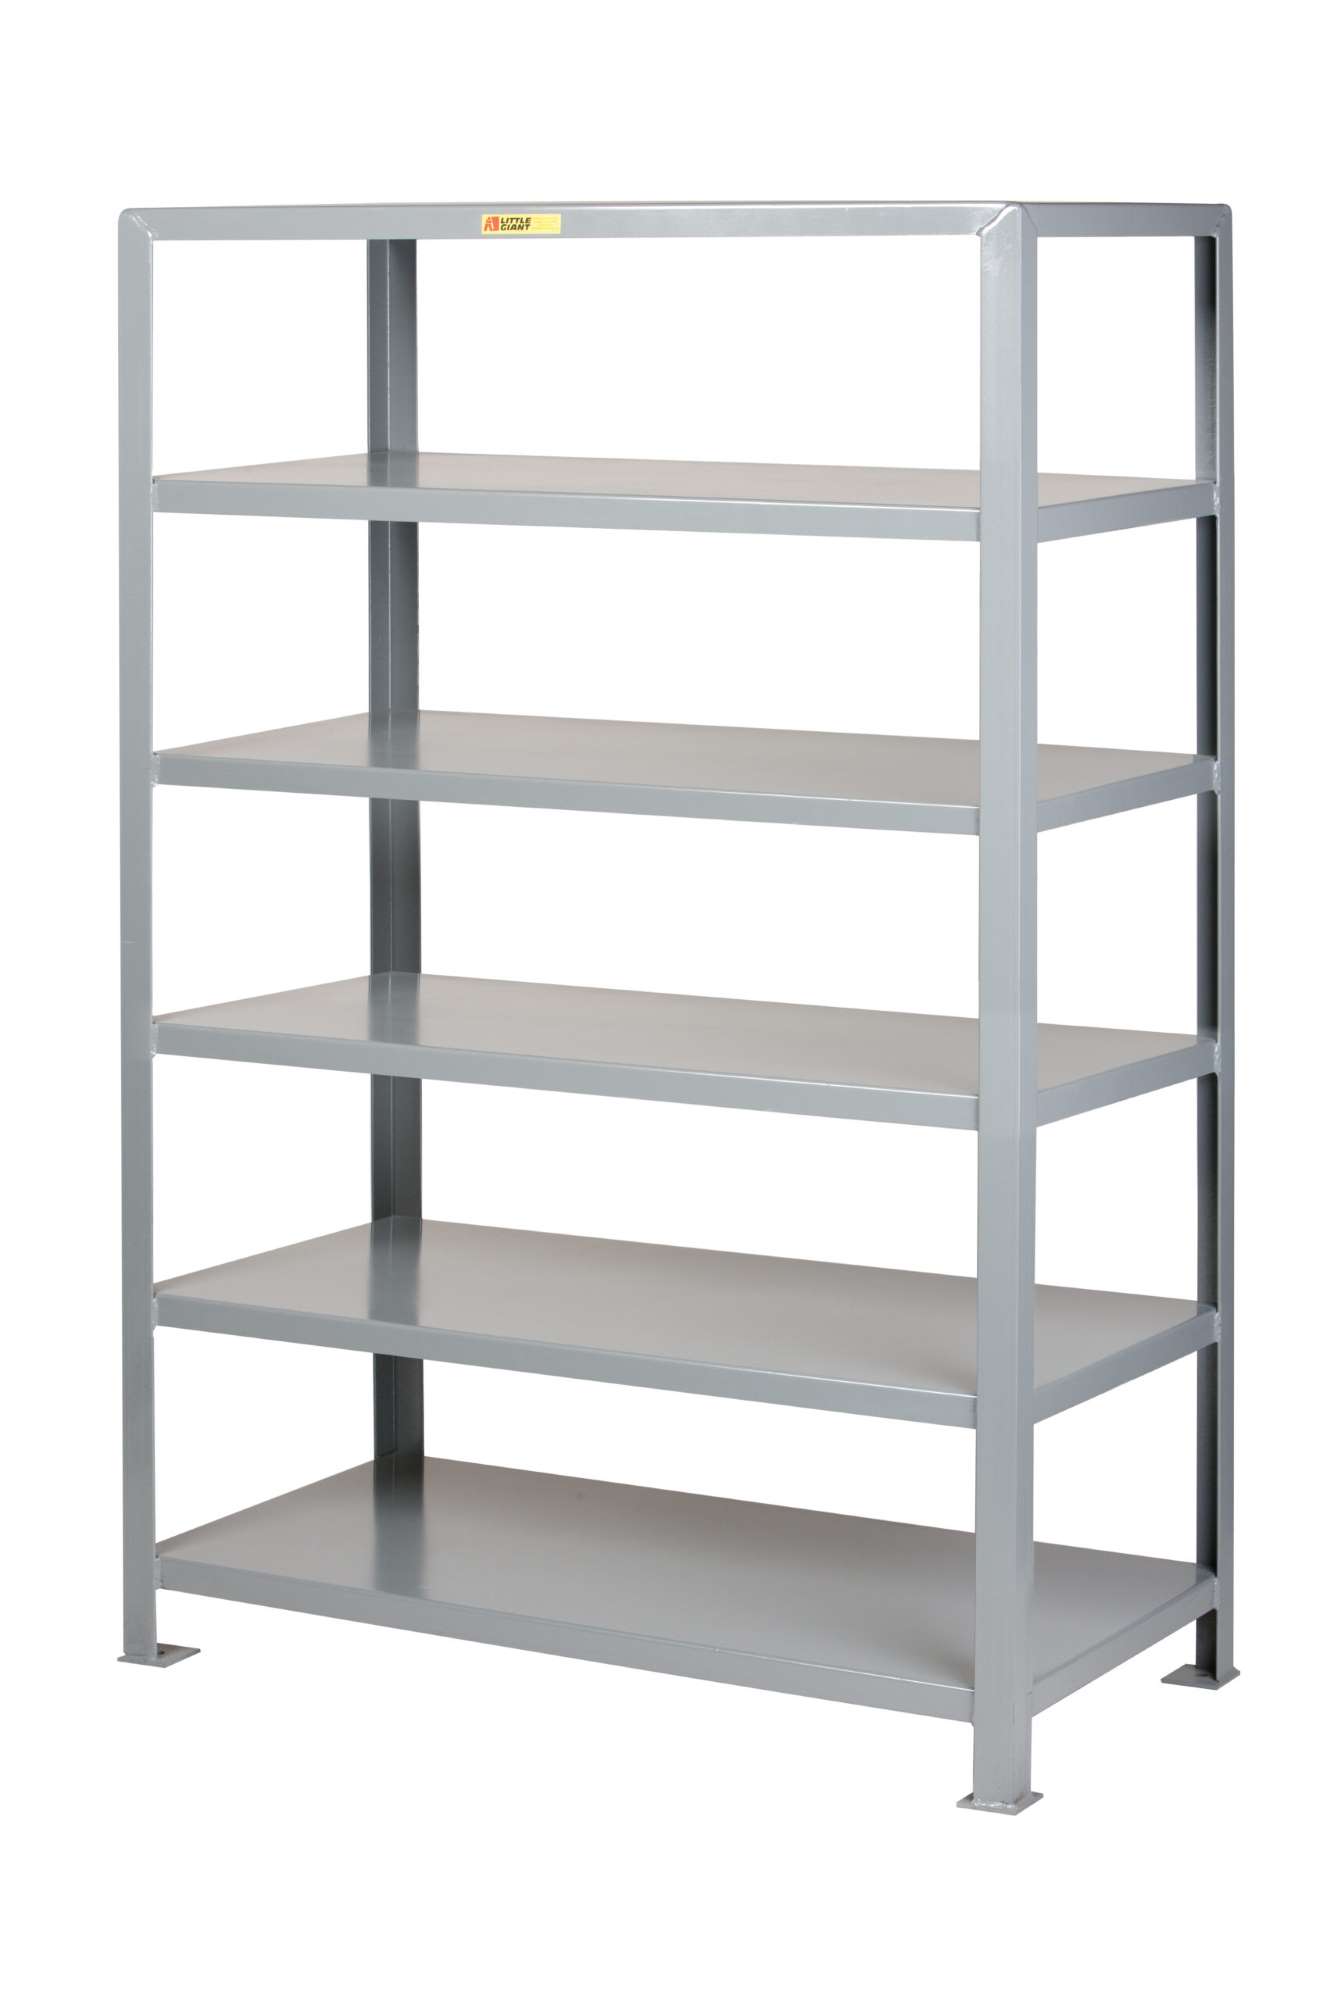 Little Giant welded steel shelving, Solid shelf 2000 lbs capacity per shelf, 12ga reinforced shelves, 2x2x3/16 uprights, Overall height 72", Anchor holes